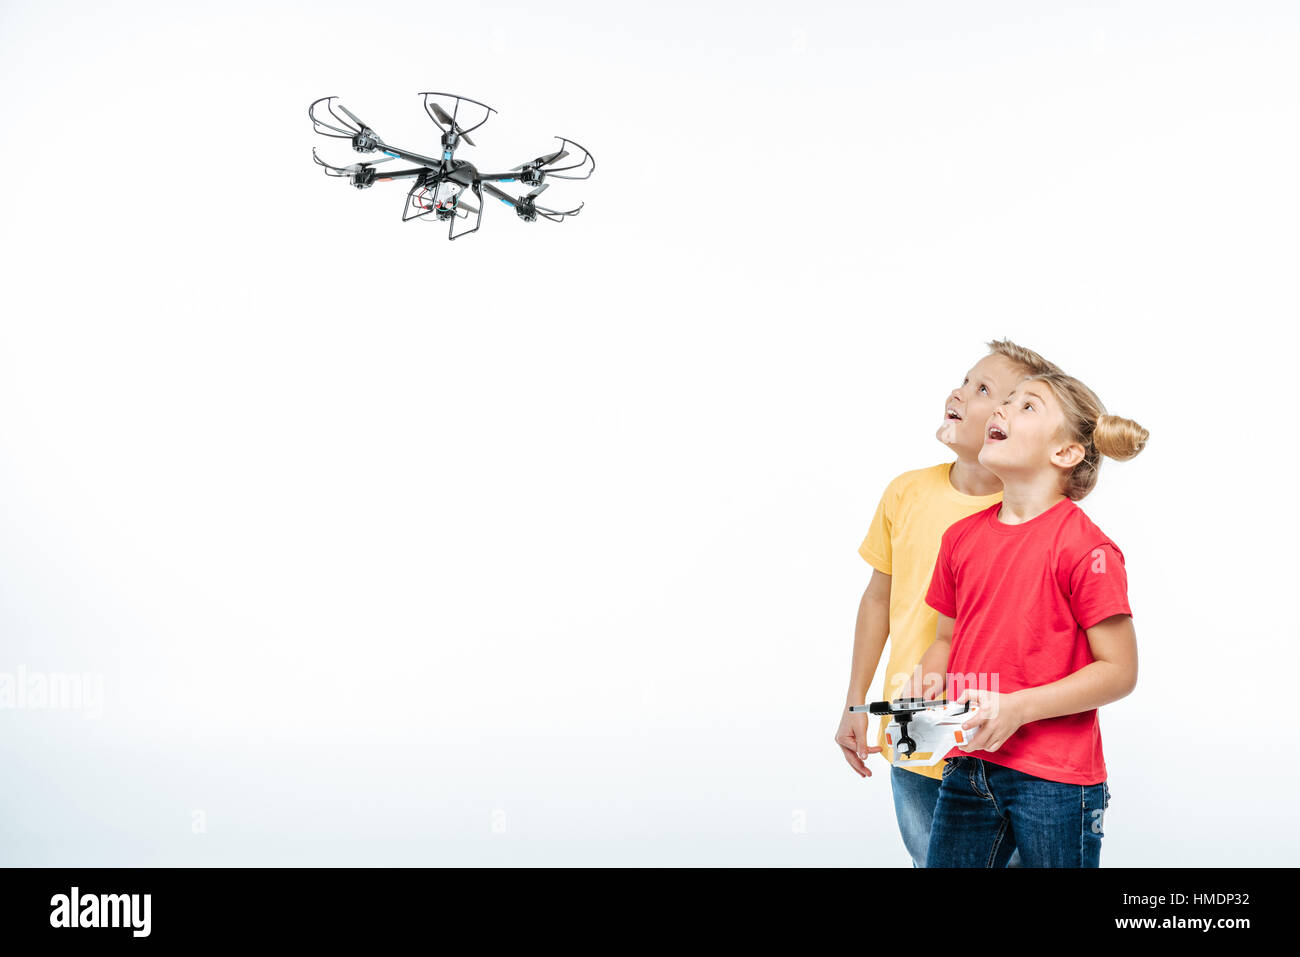 kids playing with hexacopter drone Stock Photo